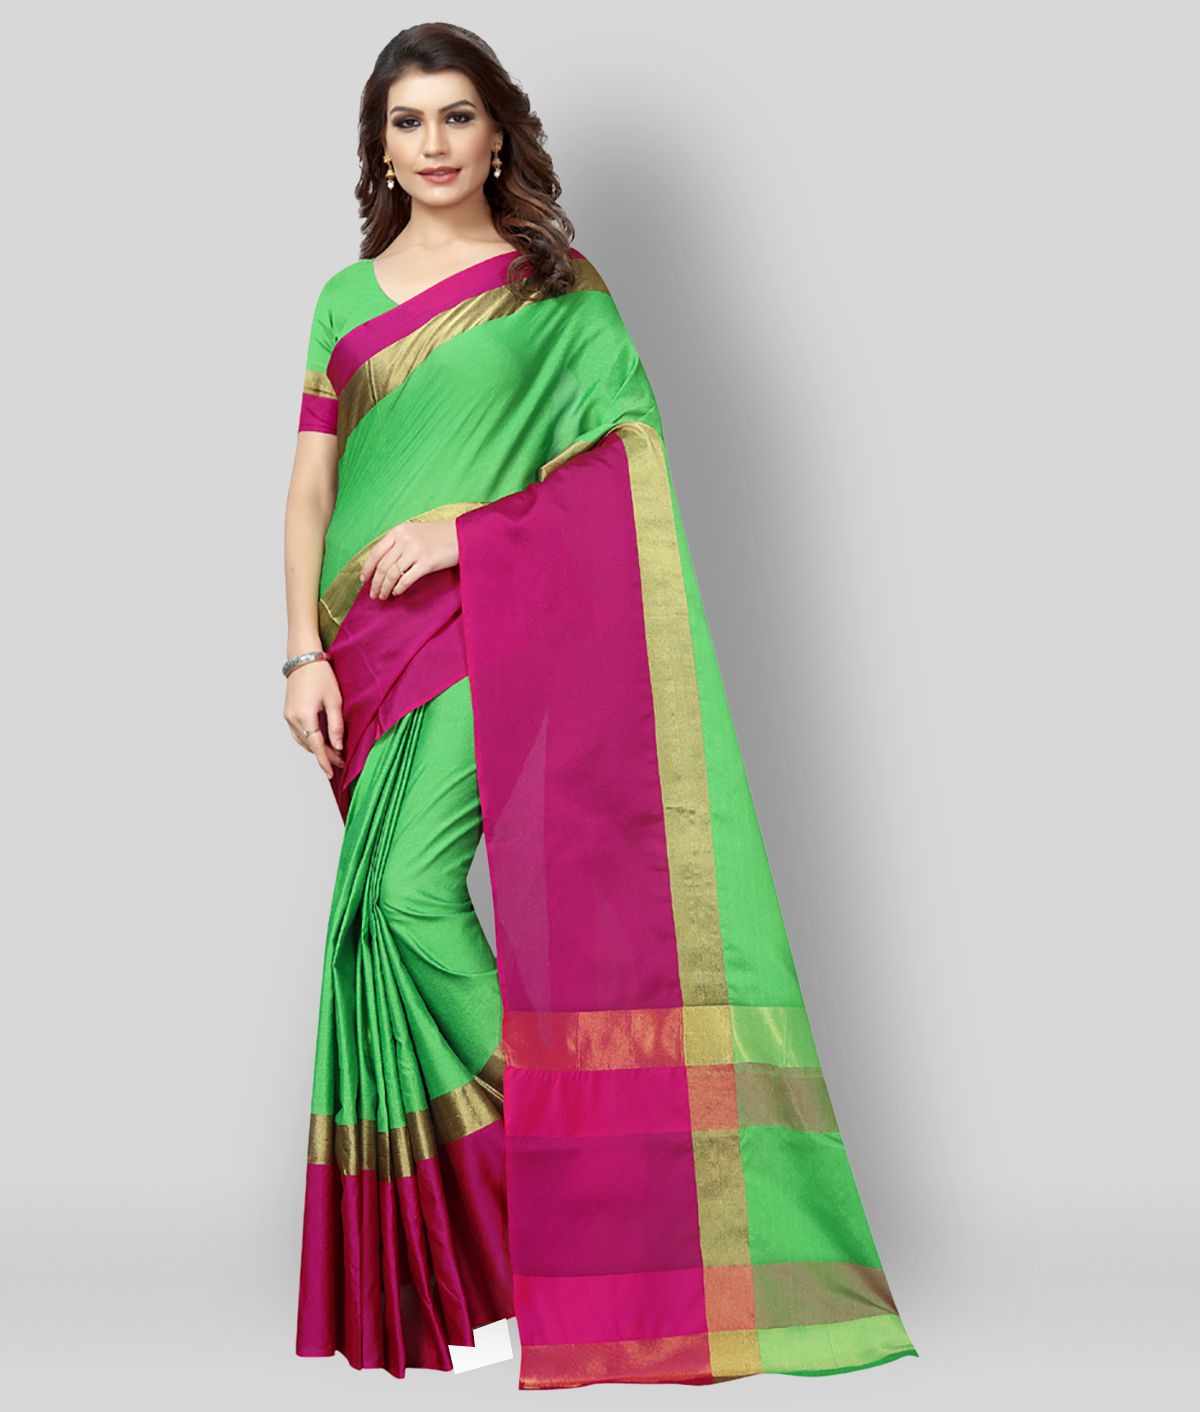 NightBlue - Green Cotton Blend Saree With Blouse Piece ( Pack of 1 )